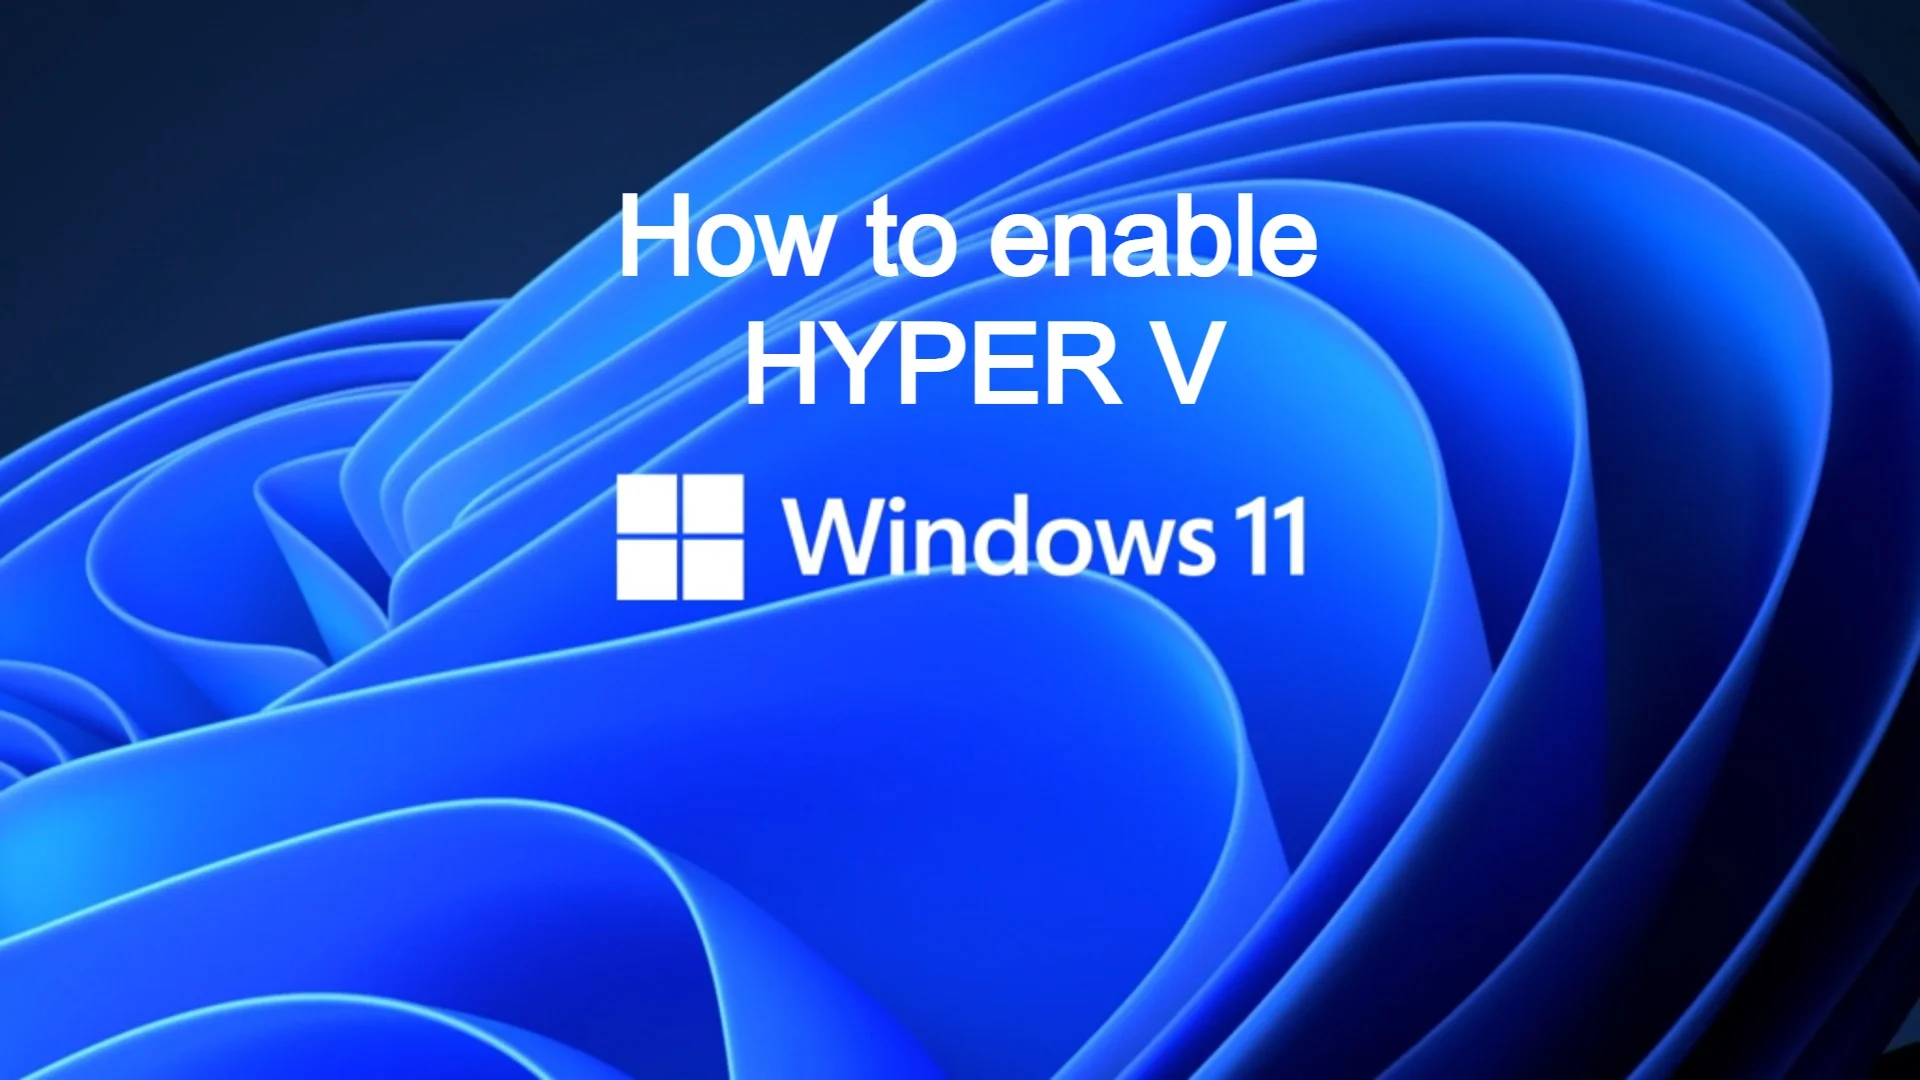 Activating Hyper V on Windows: A Step-by-Step Guide